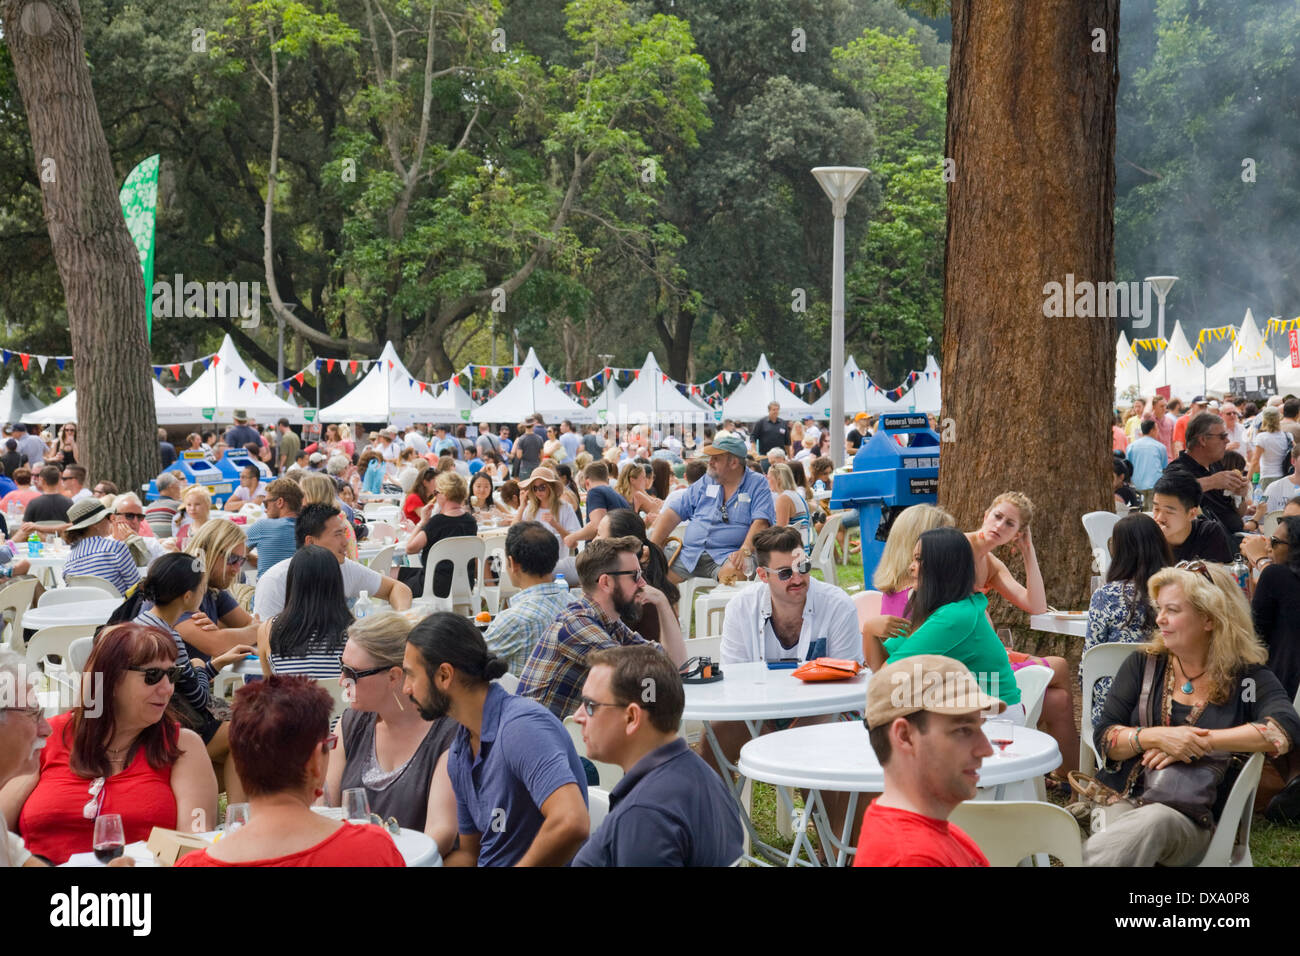 New South Wales food and wine festival held in hyde park,sydney